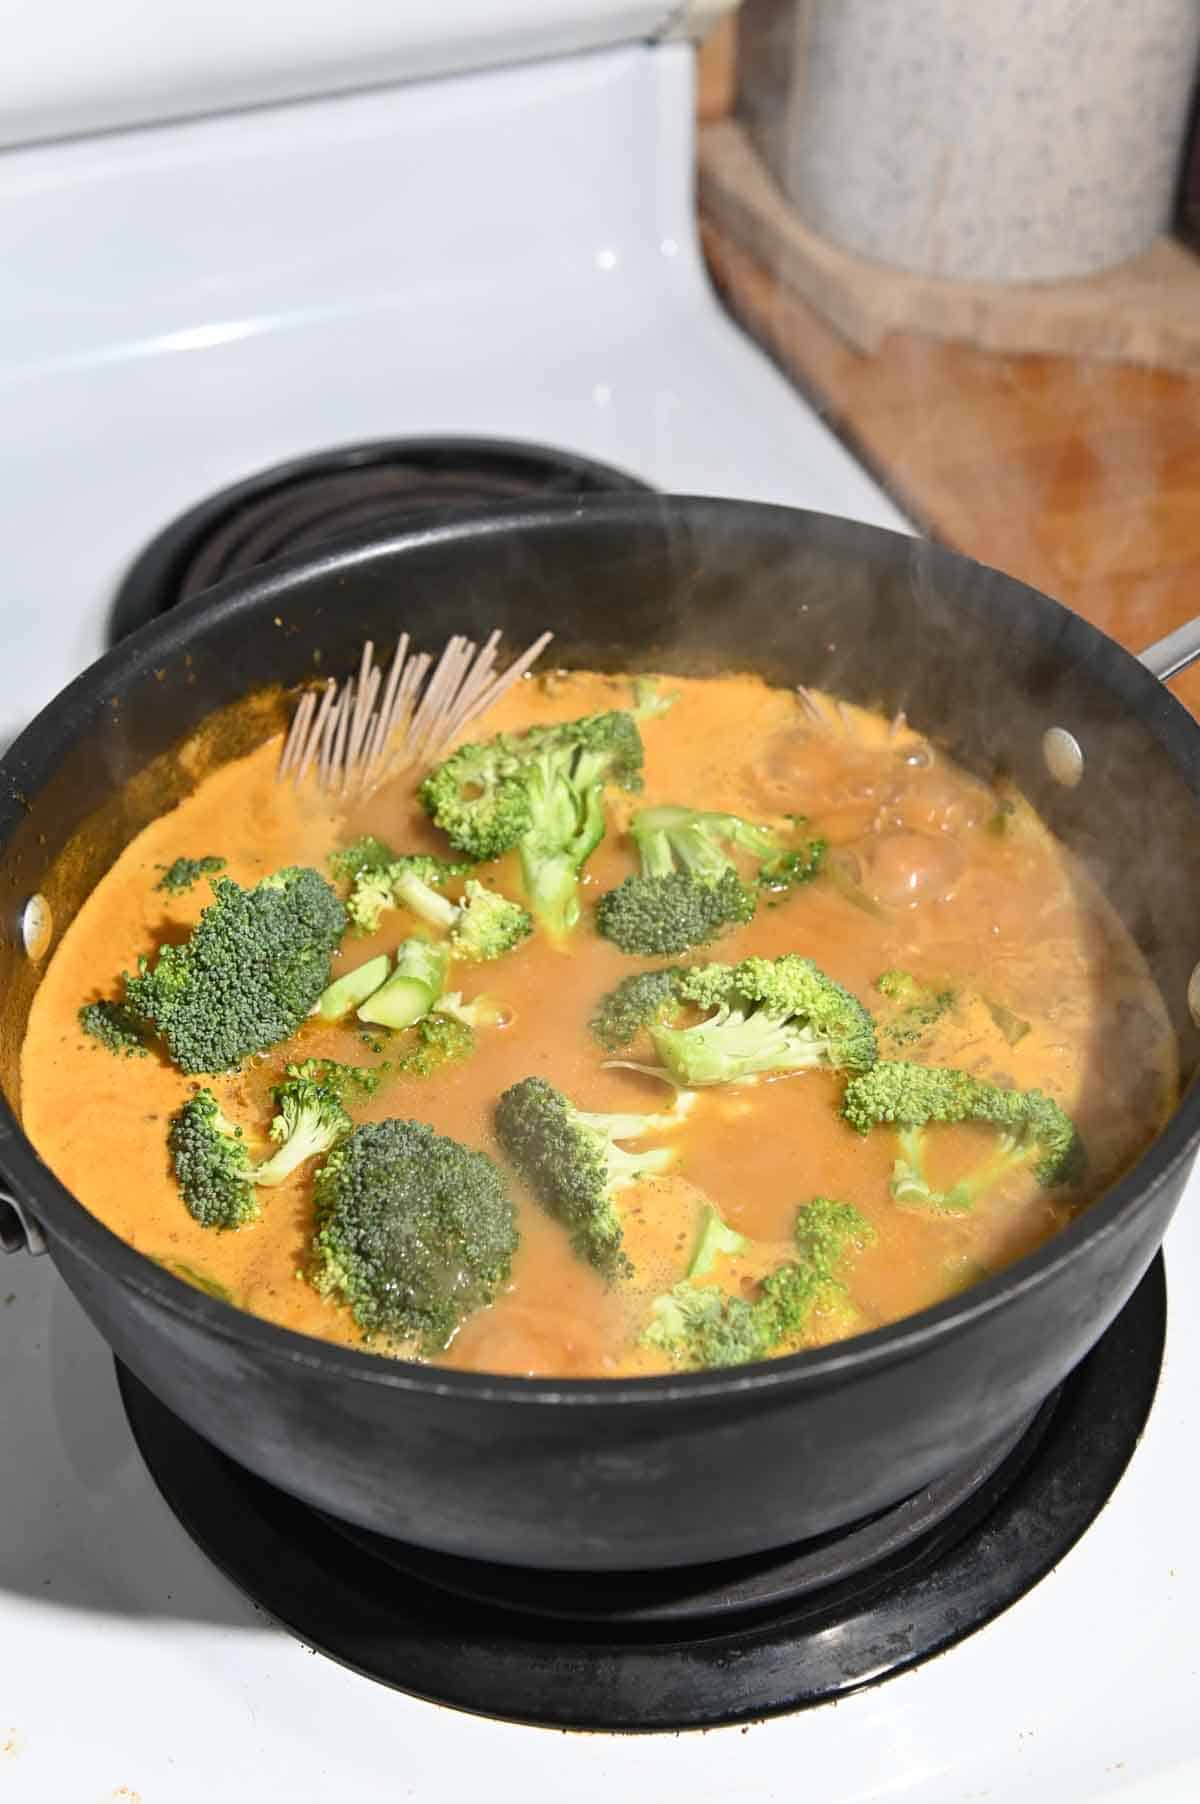 Noodles and fresh broccoli florets boiling in red broth.